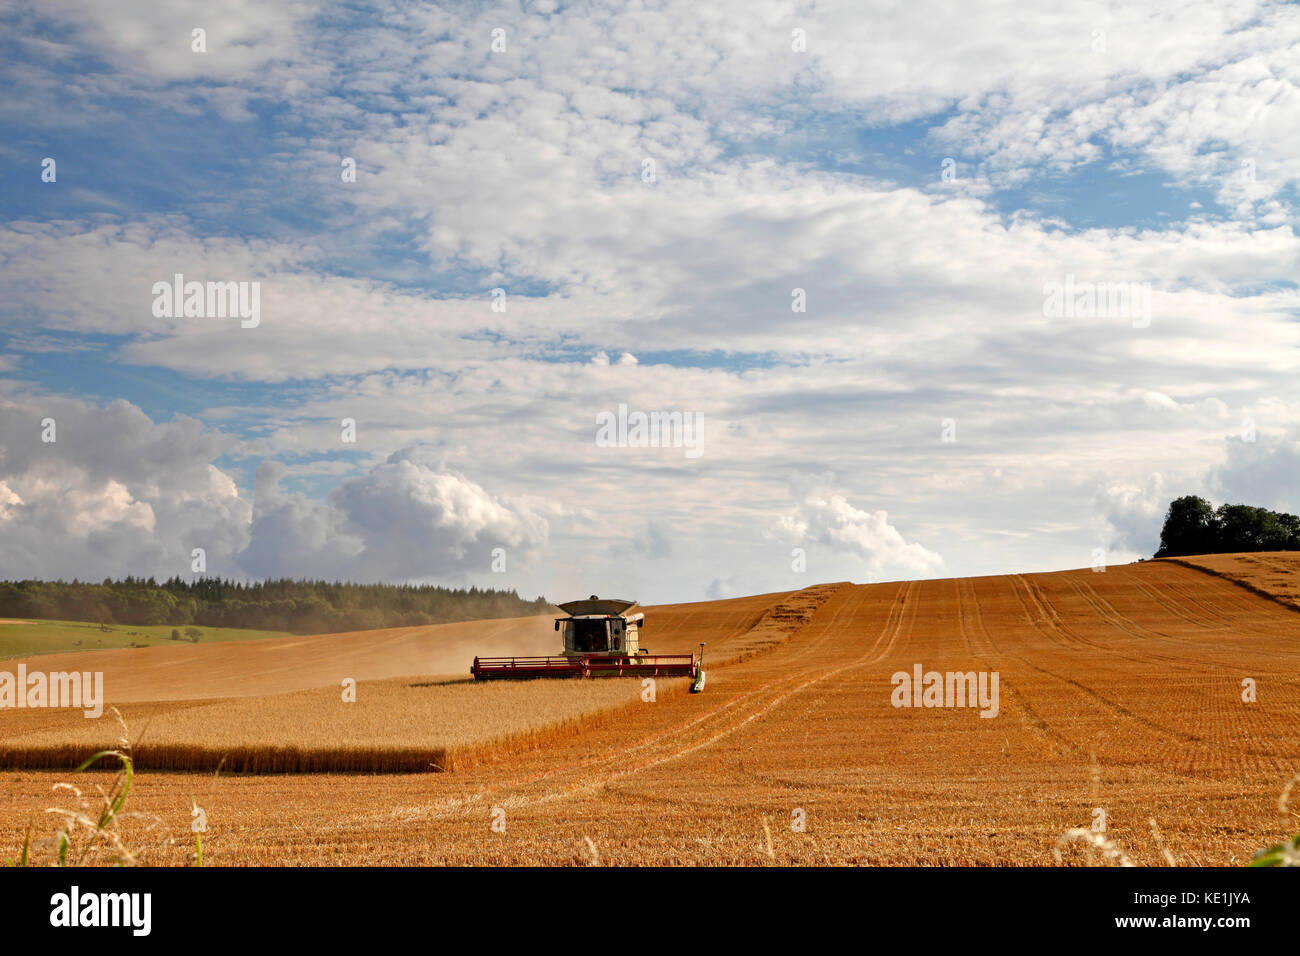 Harvesting oats near the village of Great Wishford in Wiltshire. Stock Photo